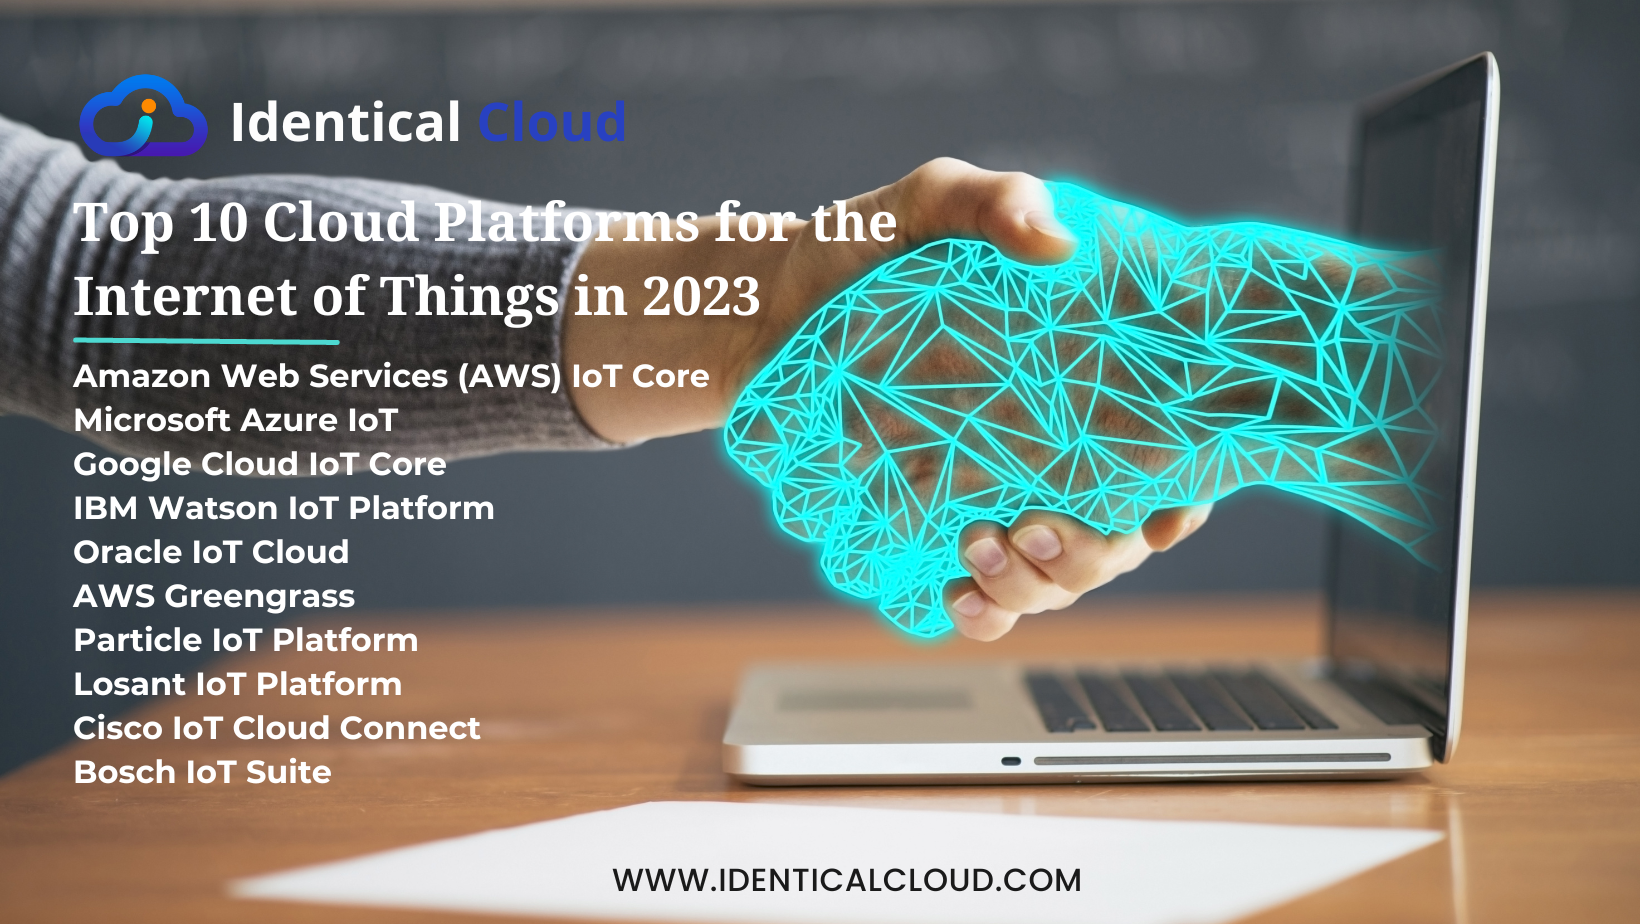 Top 10 Cloud Platforms for the Internet of Things in 2023 - identicalcloud.com